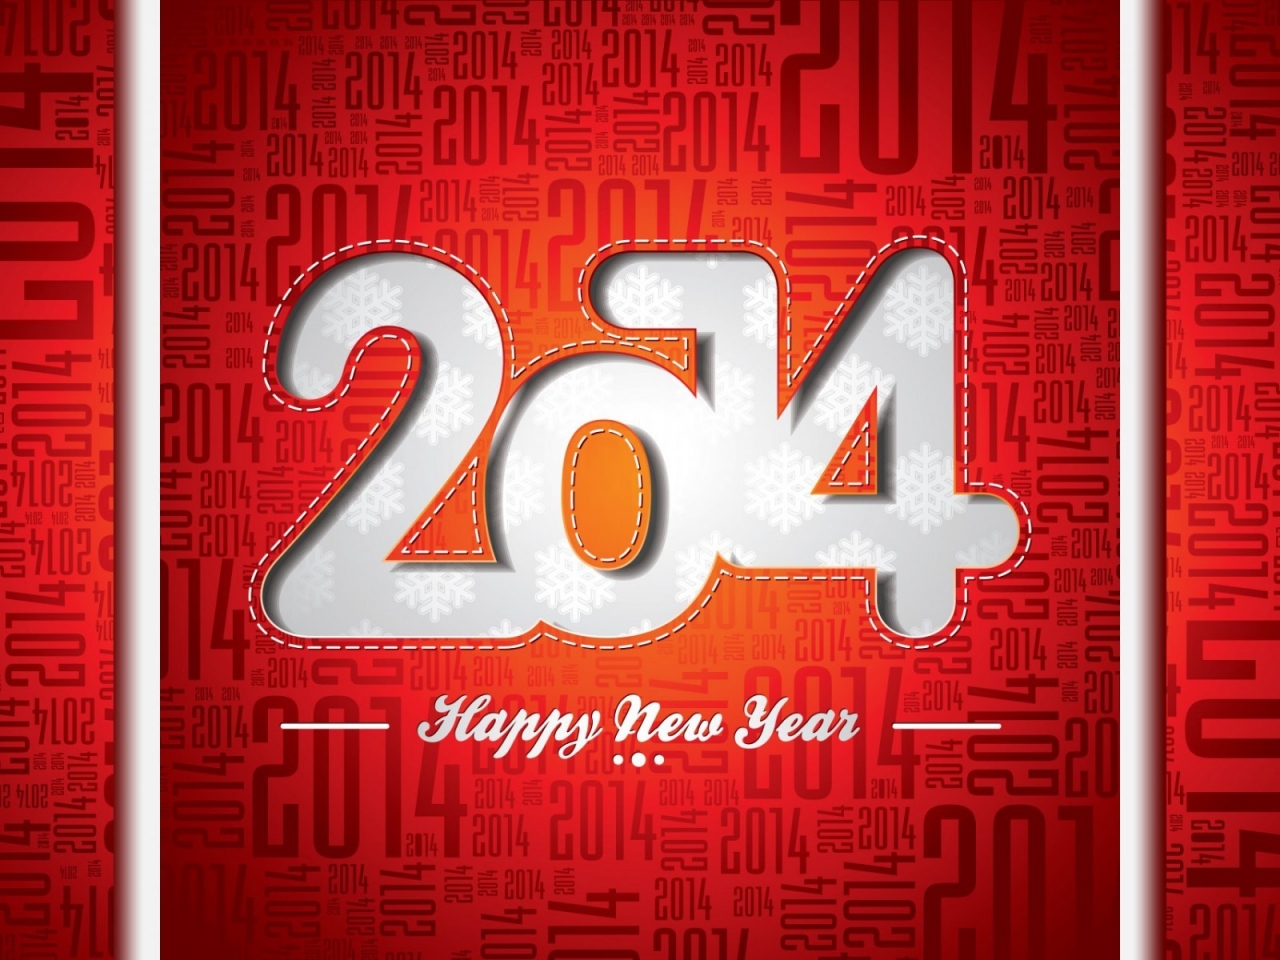 Happy New Year 2014 for 1280 x 960 resolution